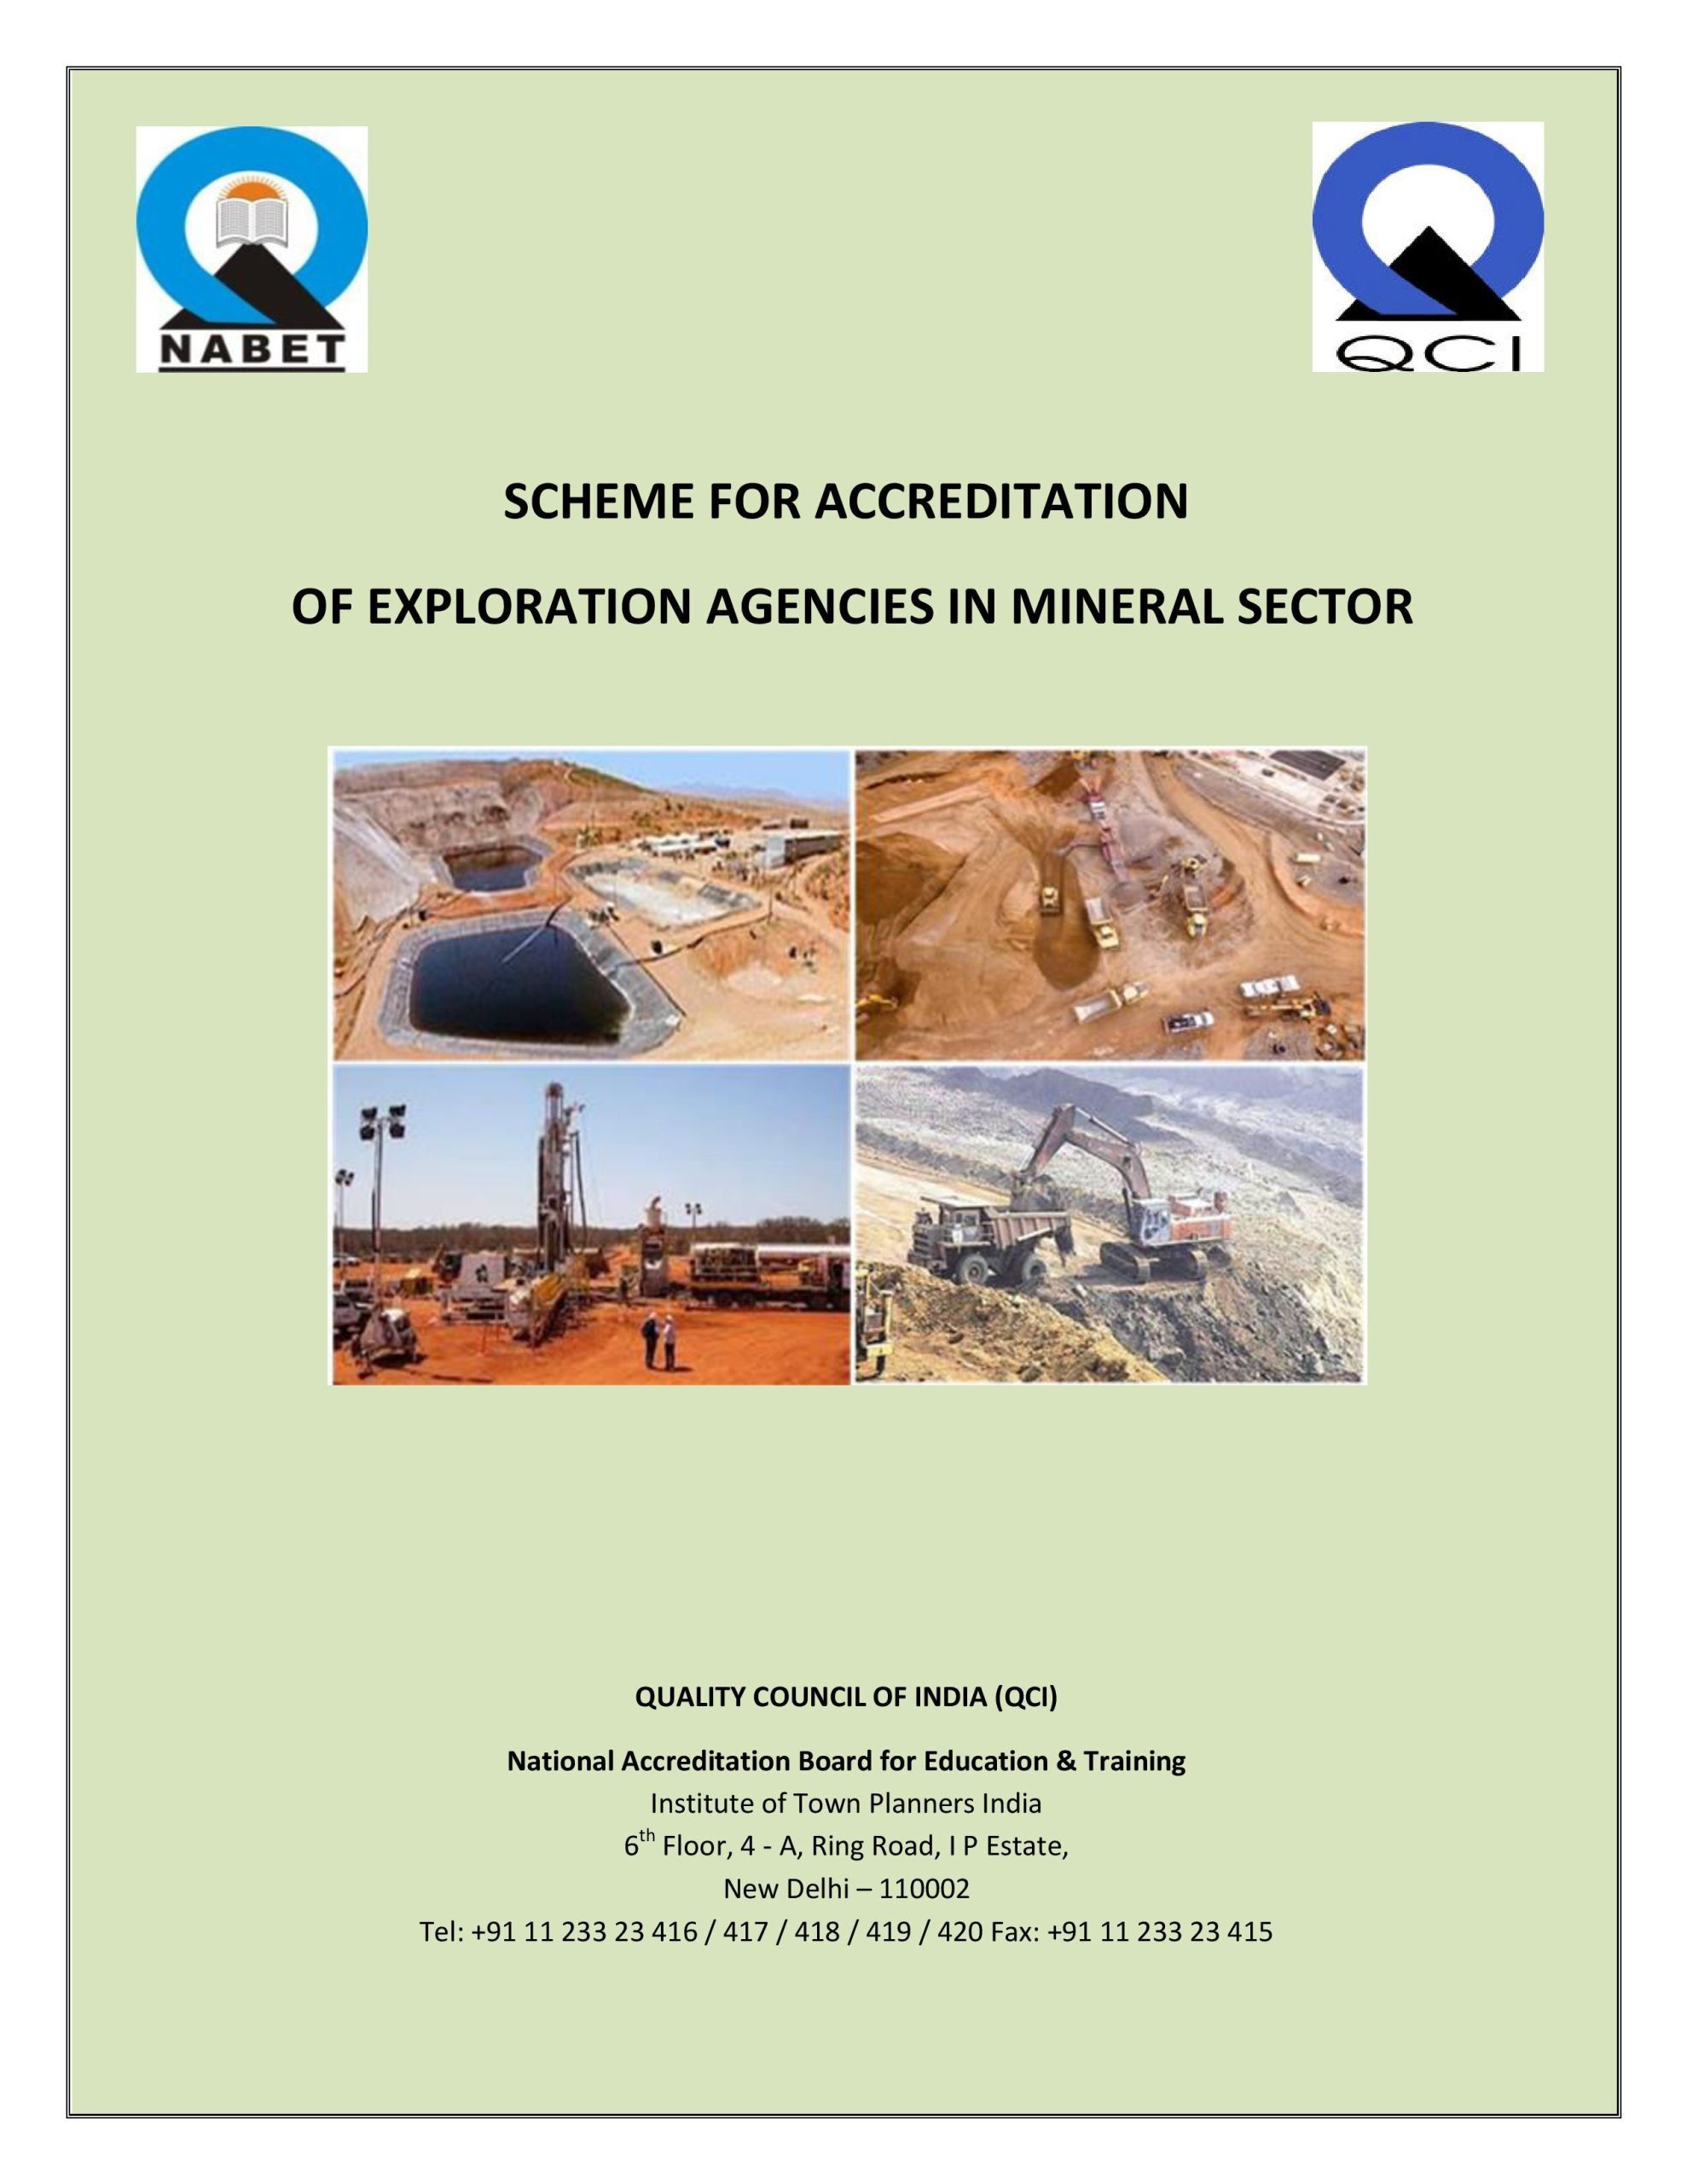 Cover page of Scheme For Exploration Agency For Mineral Sector